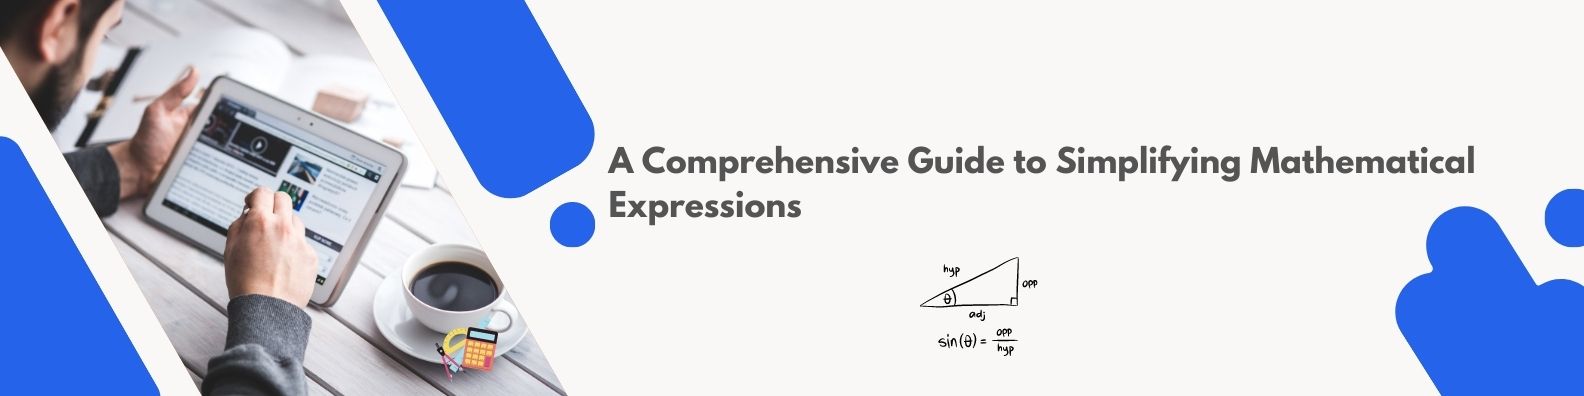 A Comprehensive Guide to Simplifying Mathematical Expressions with Examples